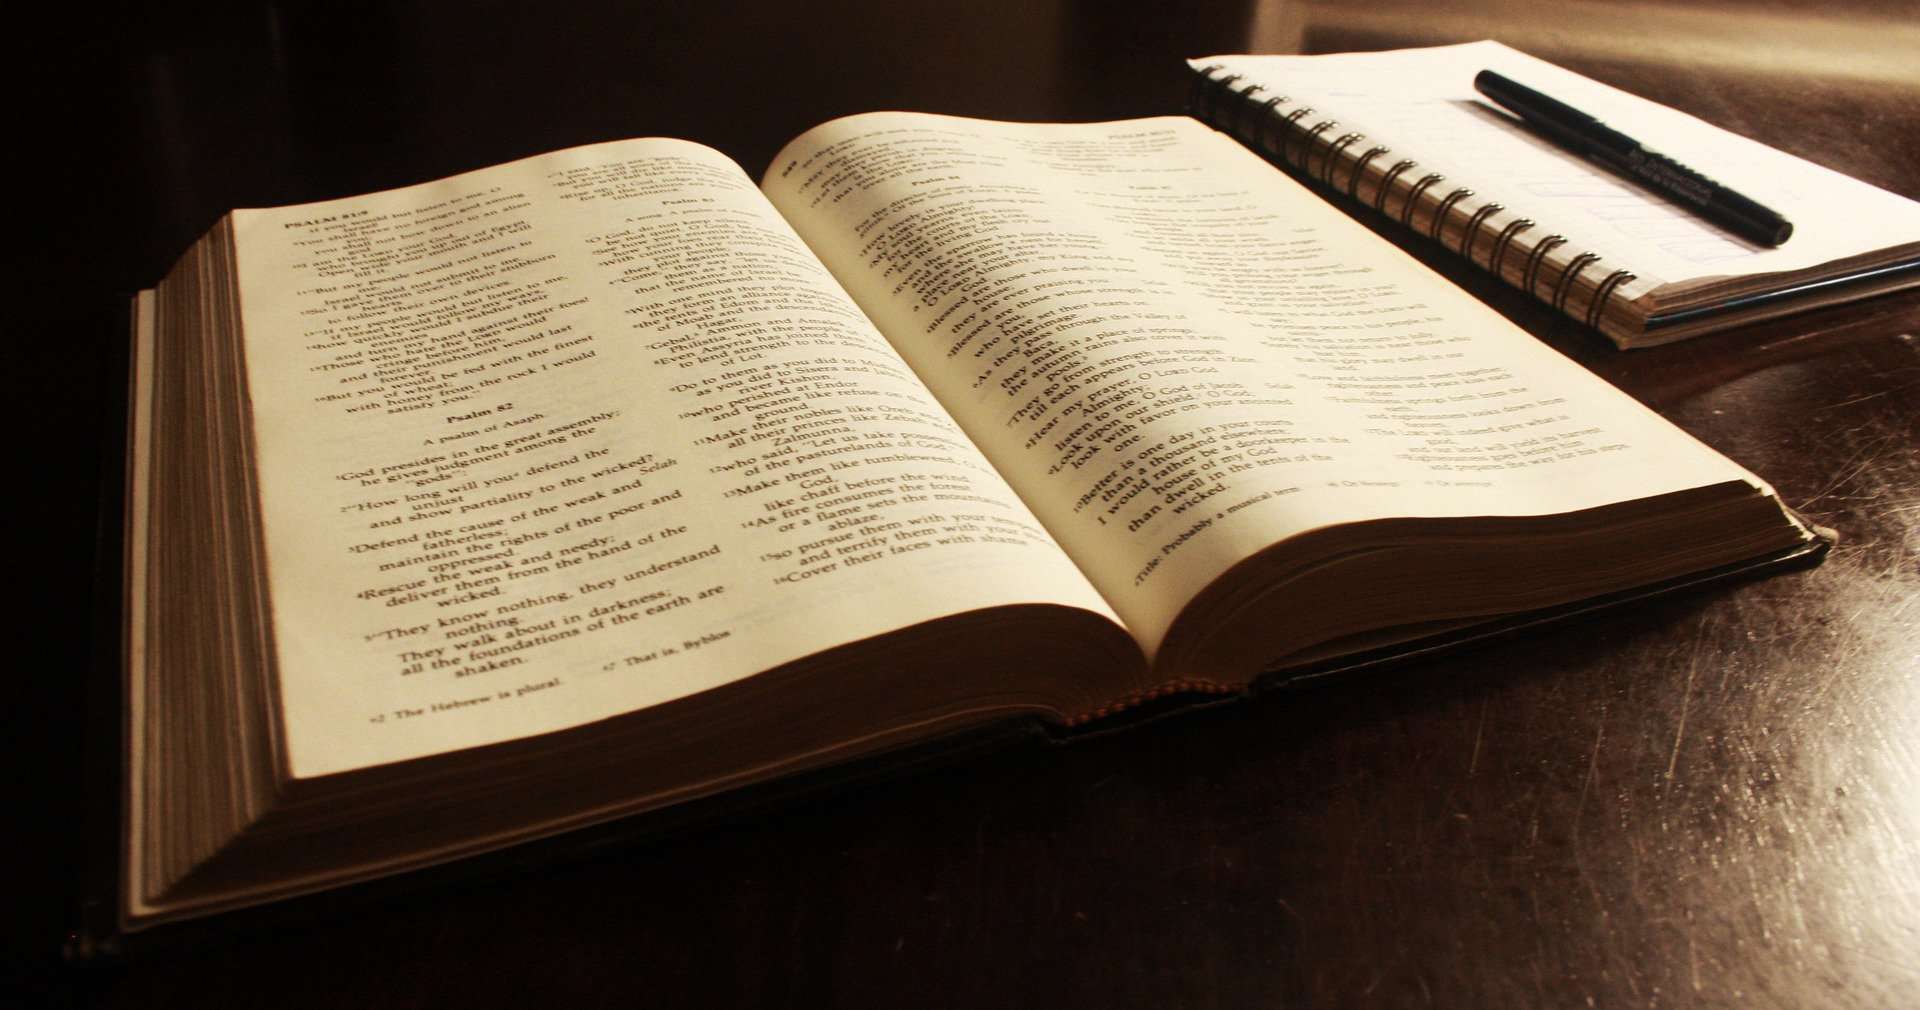 A Bible is shown open faced in soft light with a notepad and with a pen next to it.